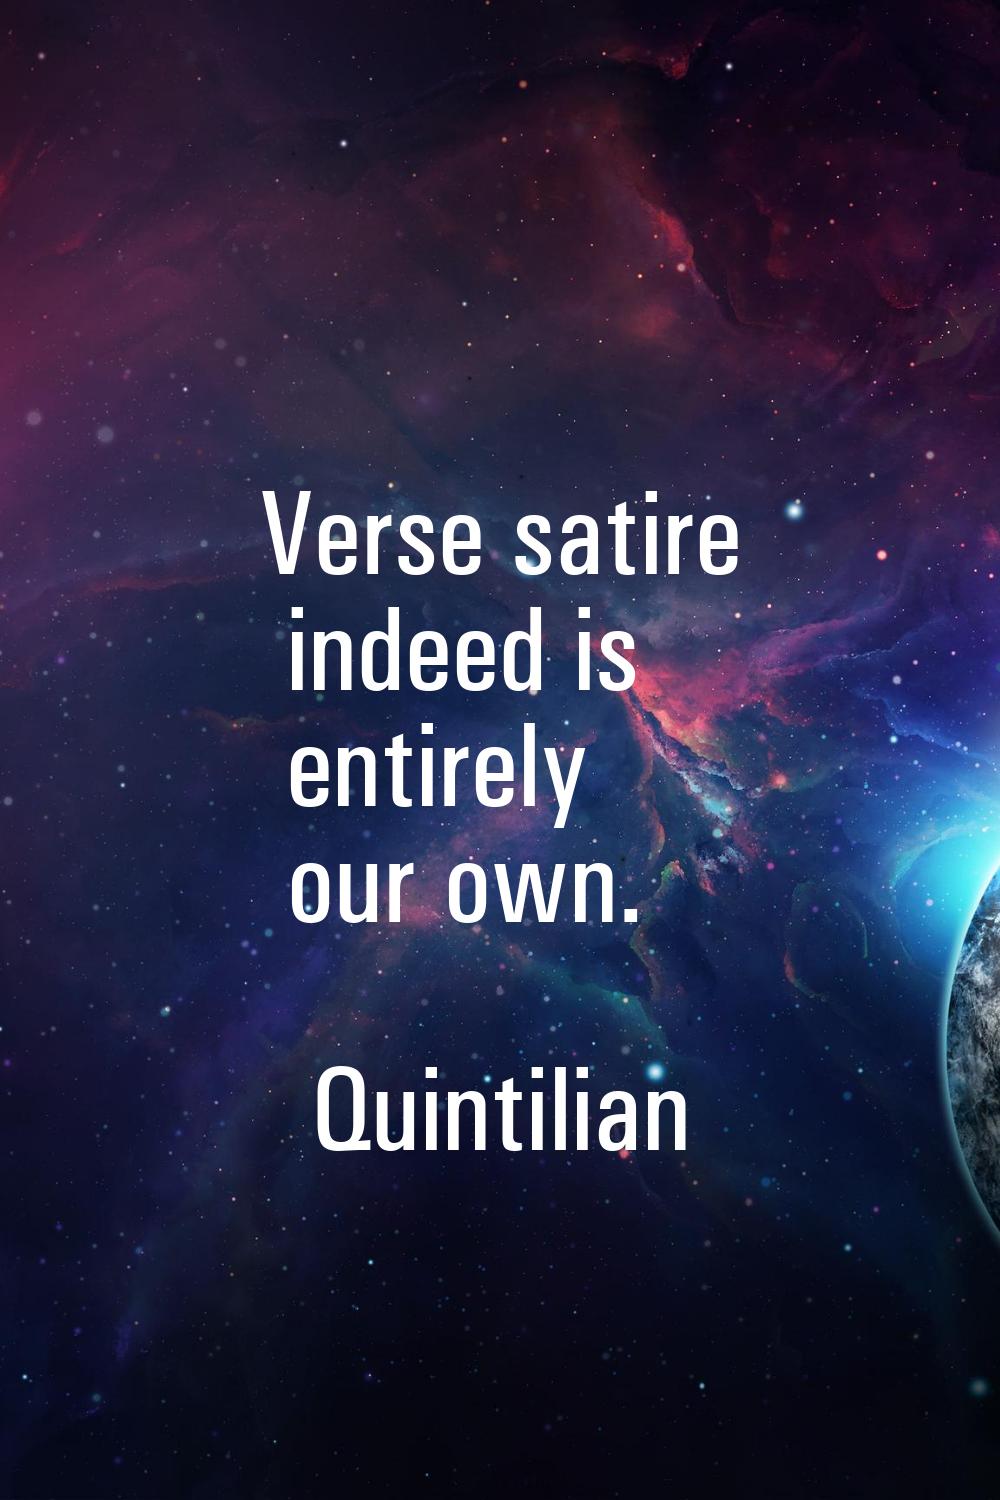 Verse satire indeed is entirely our own.